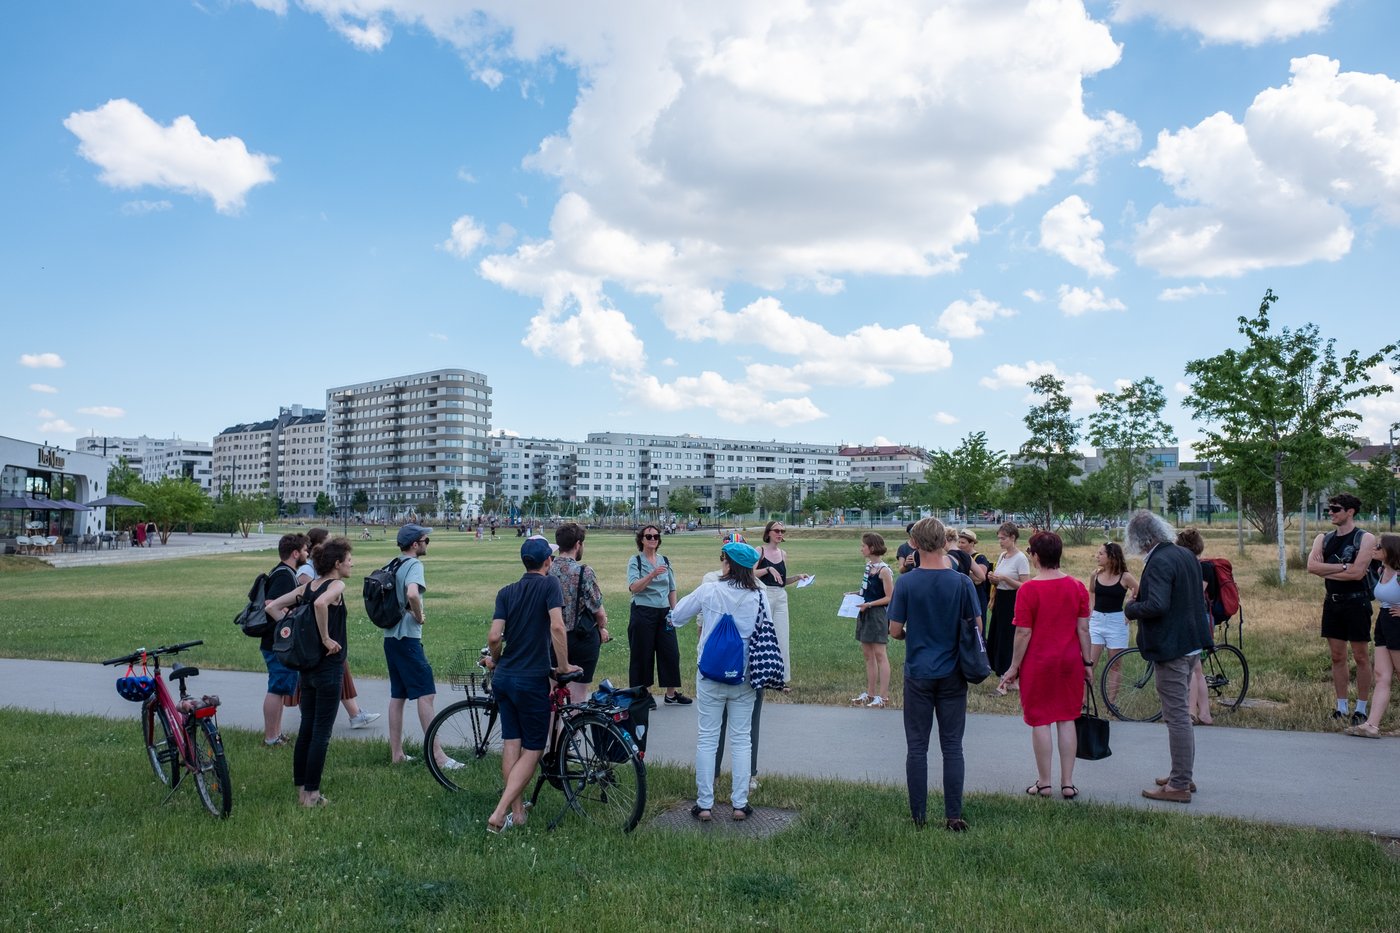 A group of about 20 people are standing on a green lawn in Helmut-Zilk-Park in 1100 Vienna, in the “Sonnwendviertel” urban development area, listening to two people talking about the building in the background.